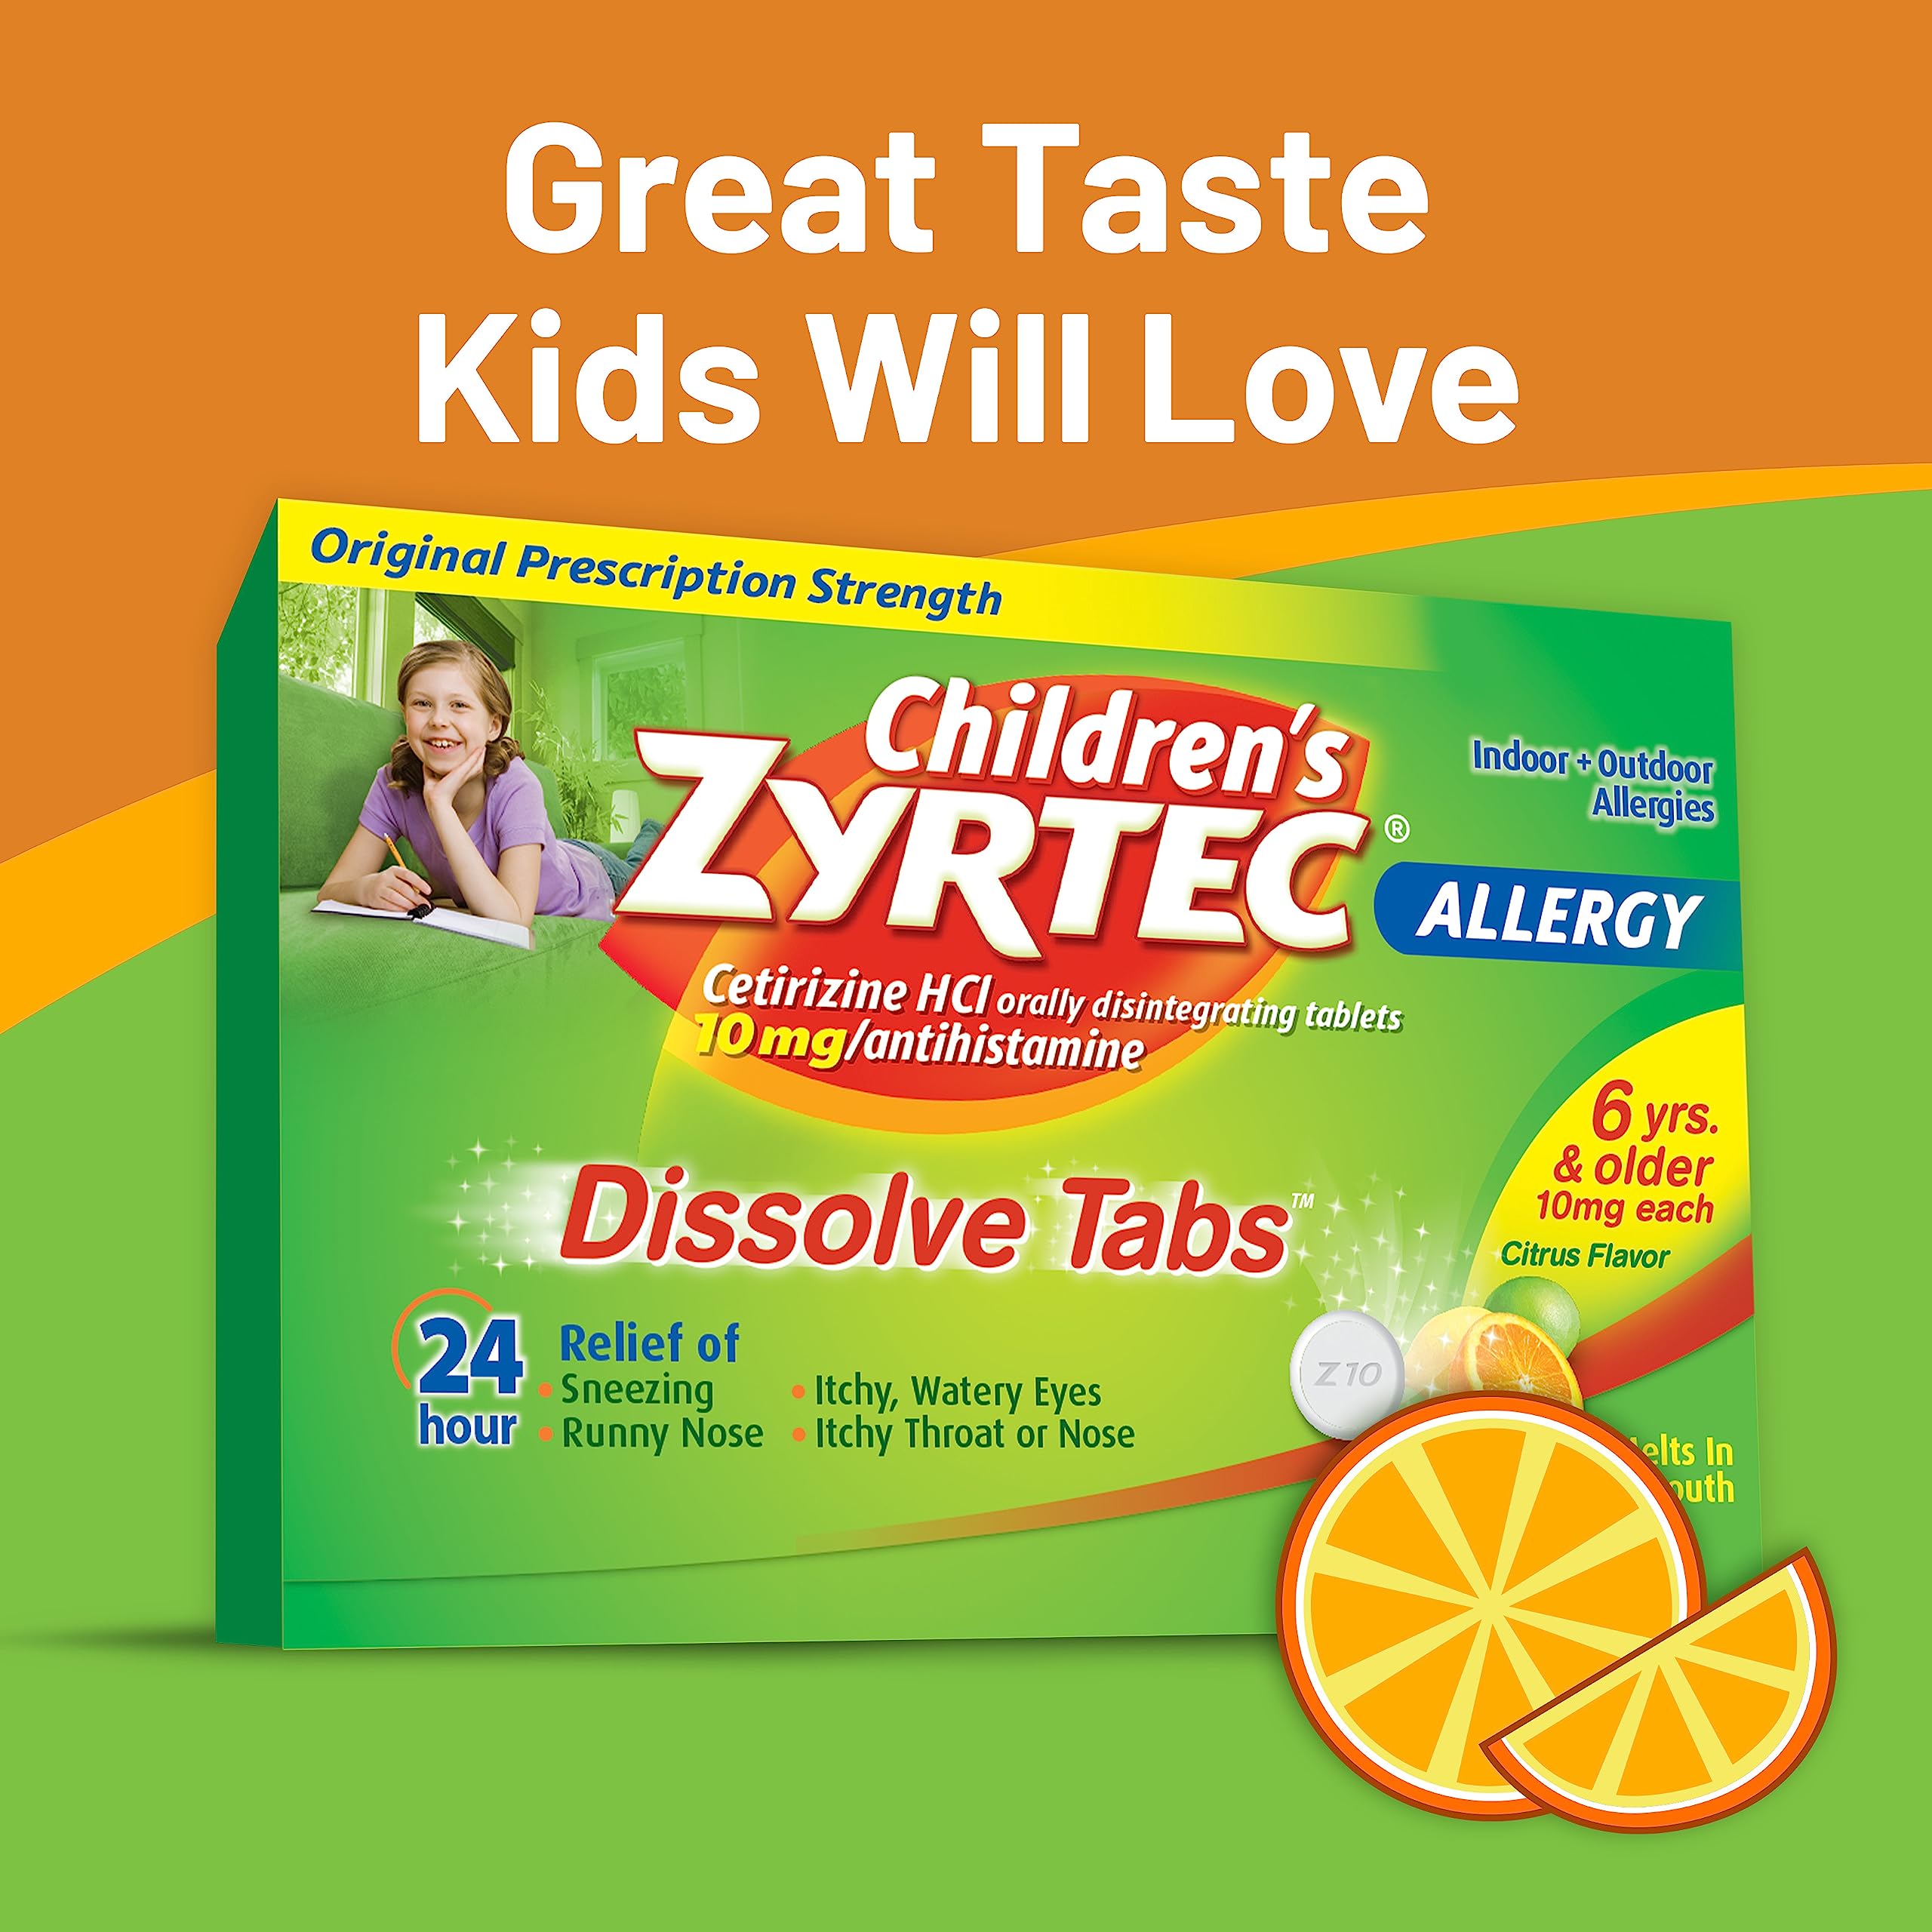 Zyrtec Children's 24 HR Dissolving Allergy Relief Tablets with Cetirizine, Citrus Flavored, 12 ct (Pack of 2)